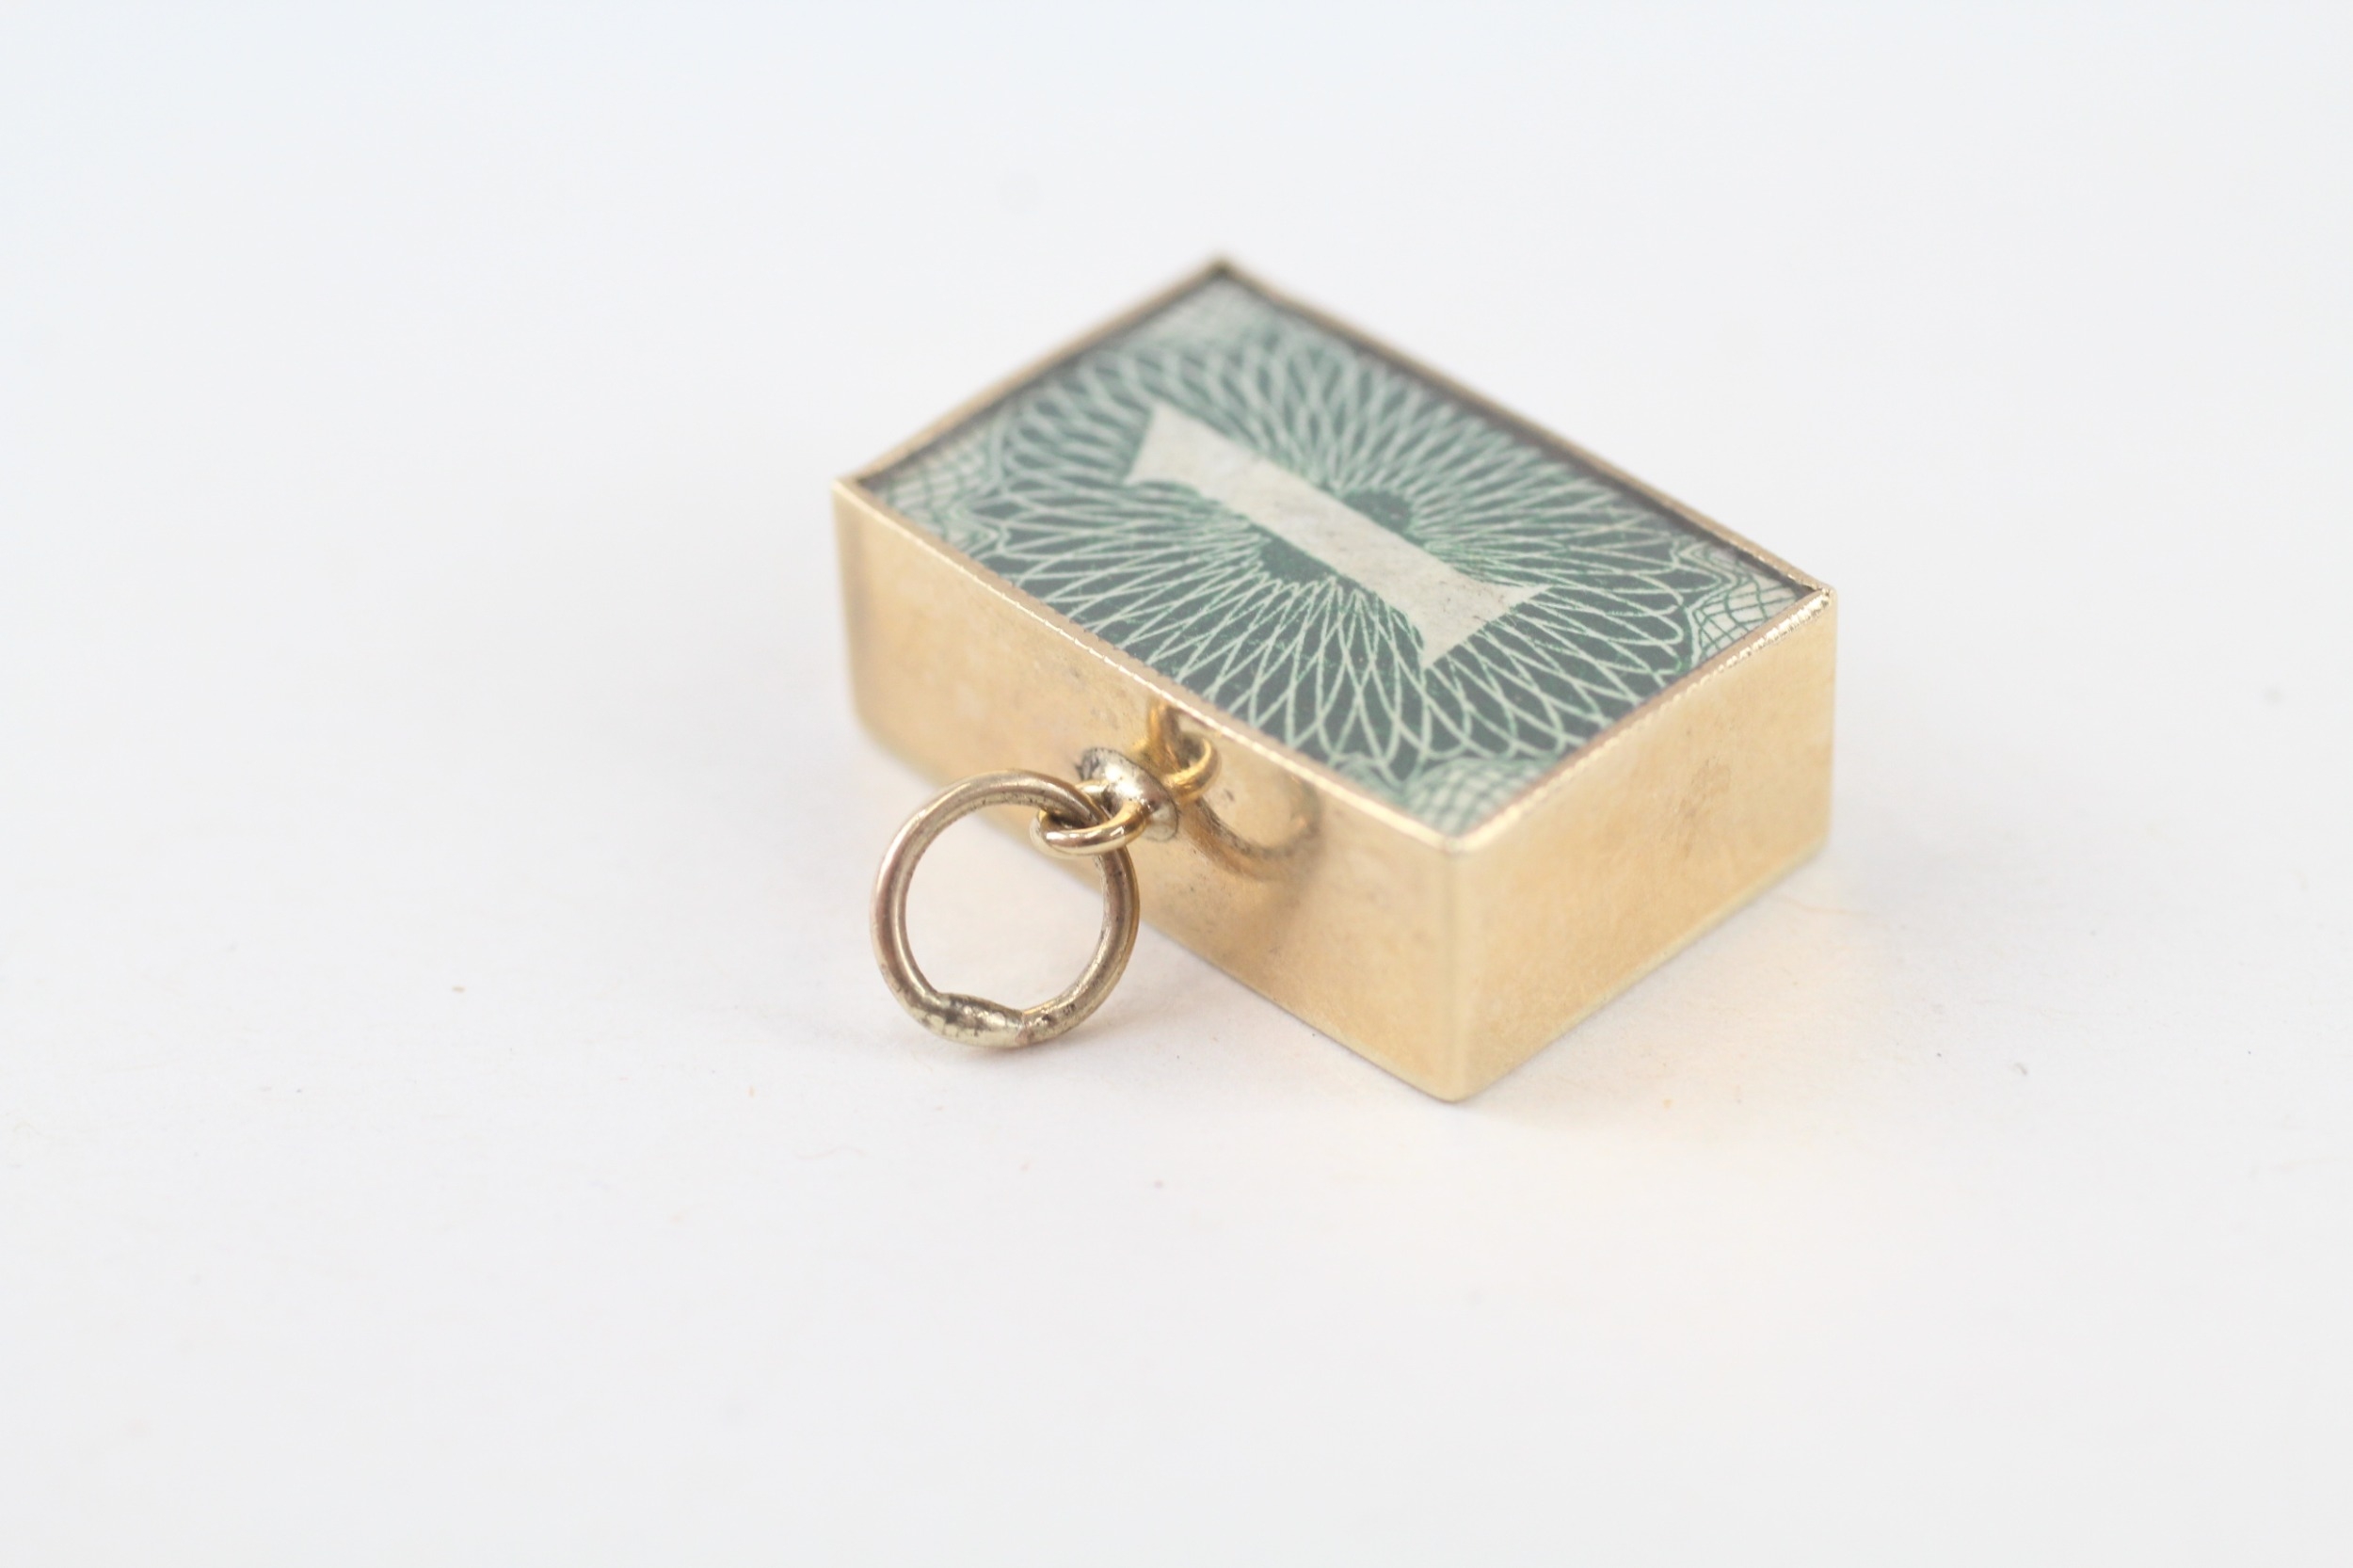 9ct gold vintage folded one pound note charm, in case of emergency break glass (3.3g) - Image 3 of 4